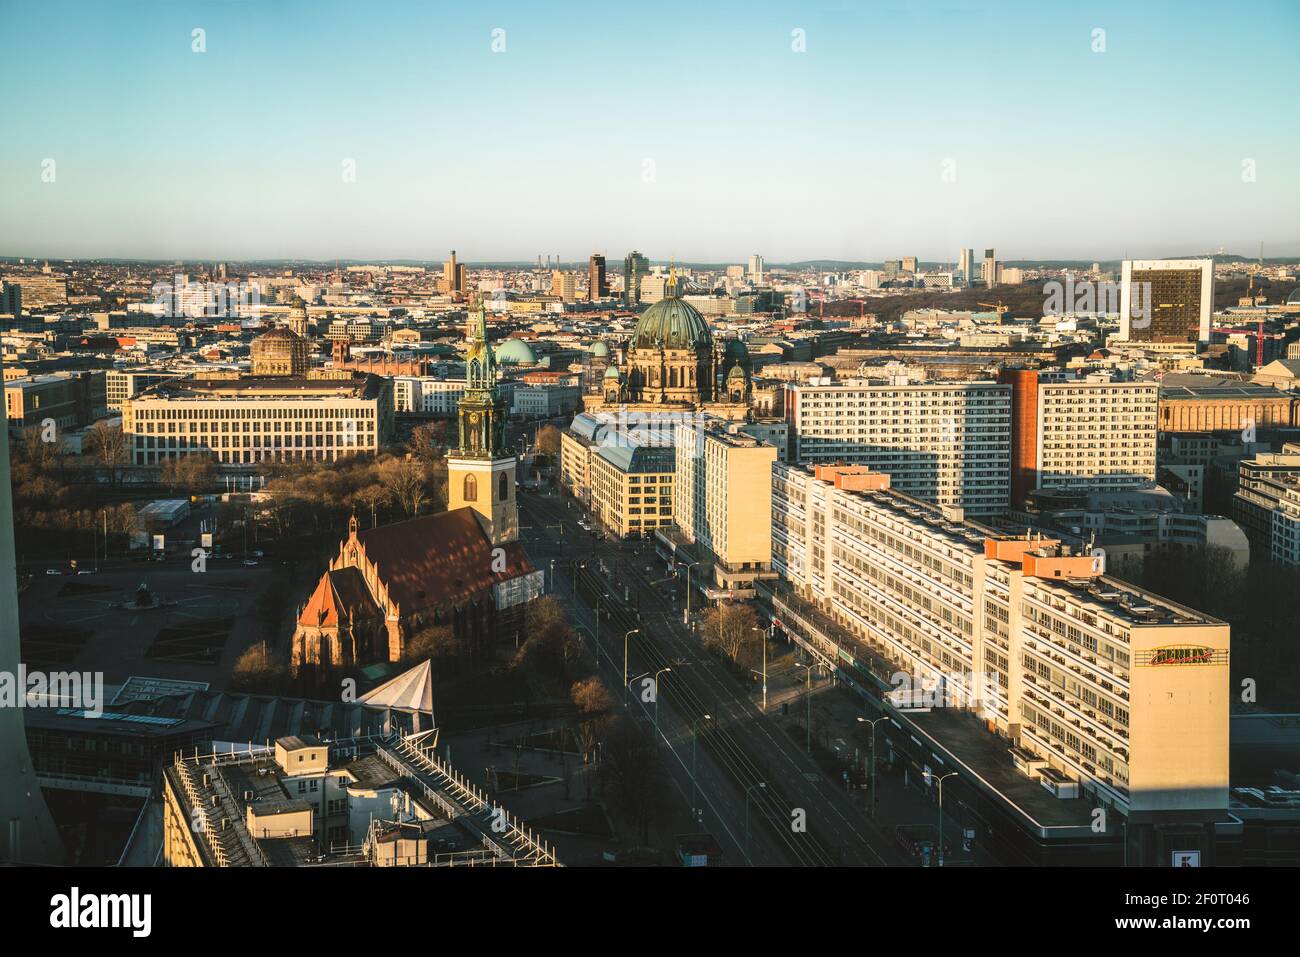 Berlin, Germany - March 4, 2021: Aerial view of Berlin city skyline towards Berlin cathedral and Potsdamer Platz during sunset. Stock Photo